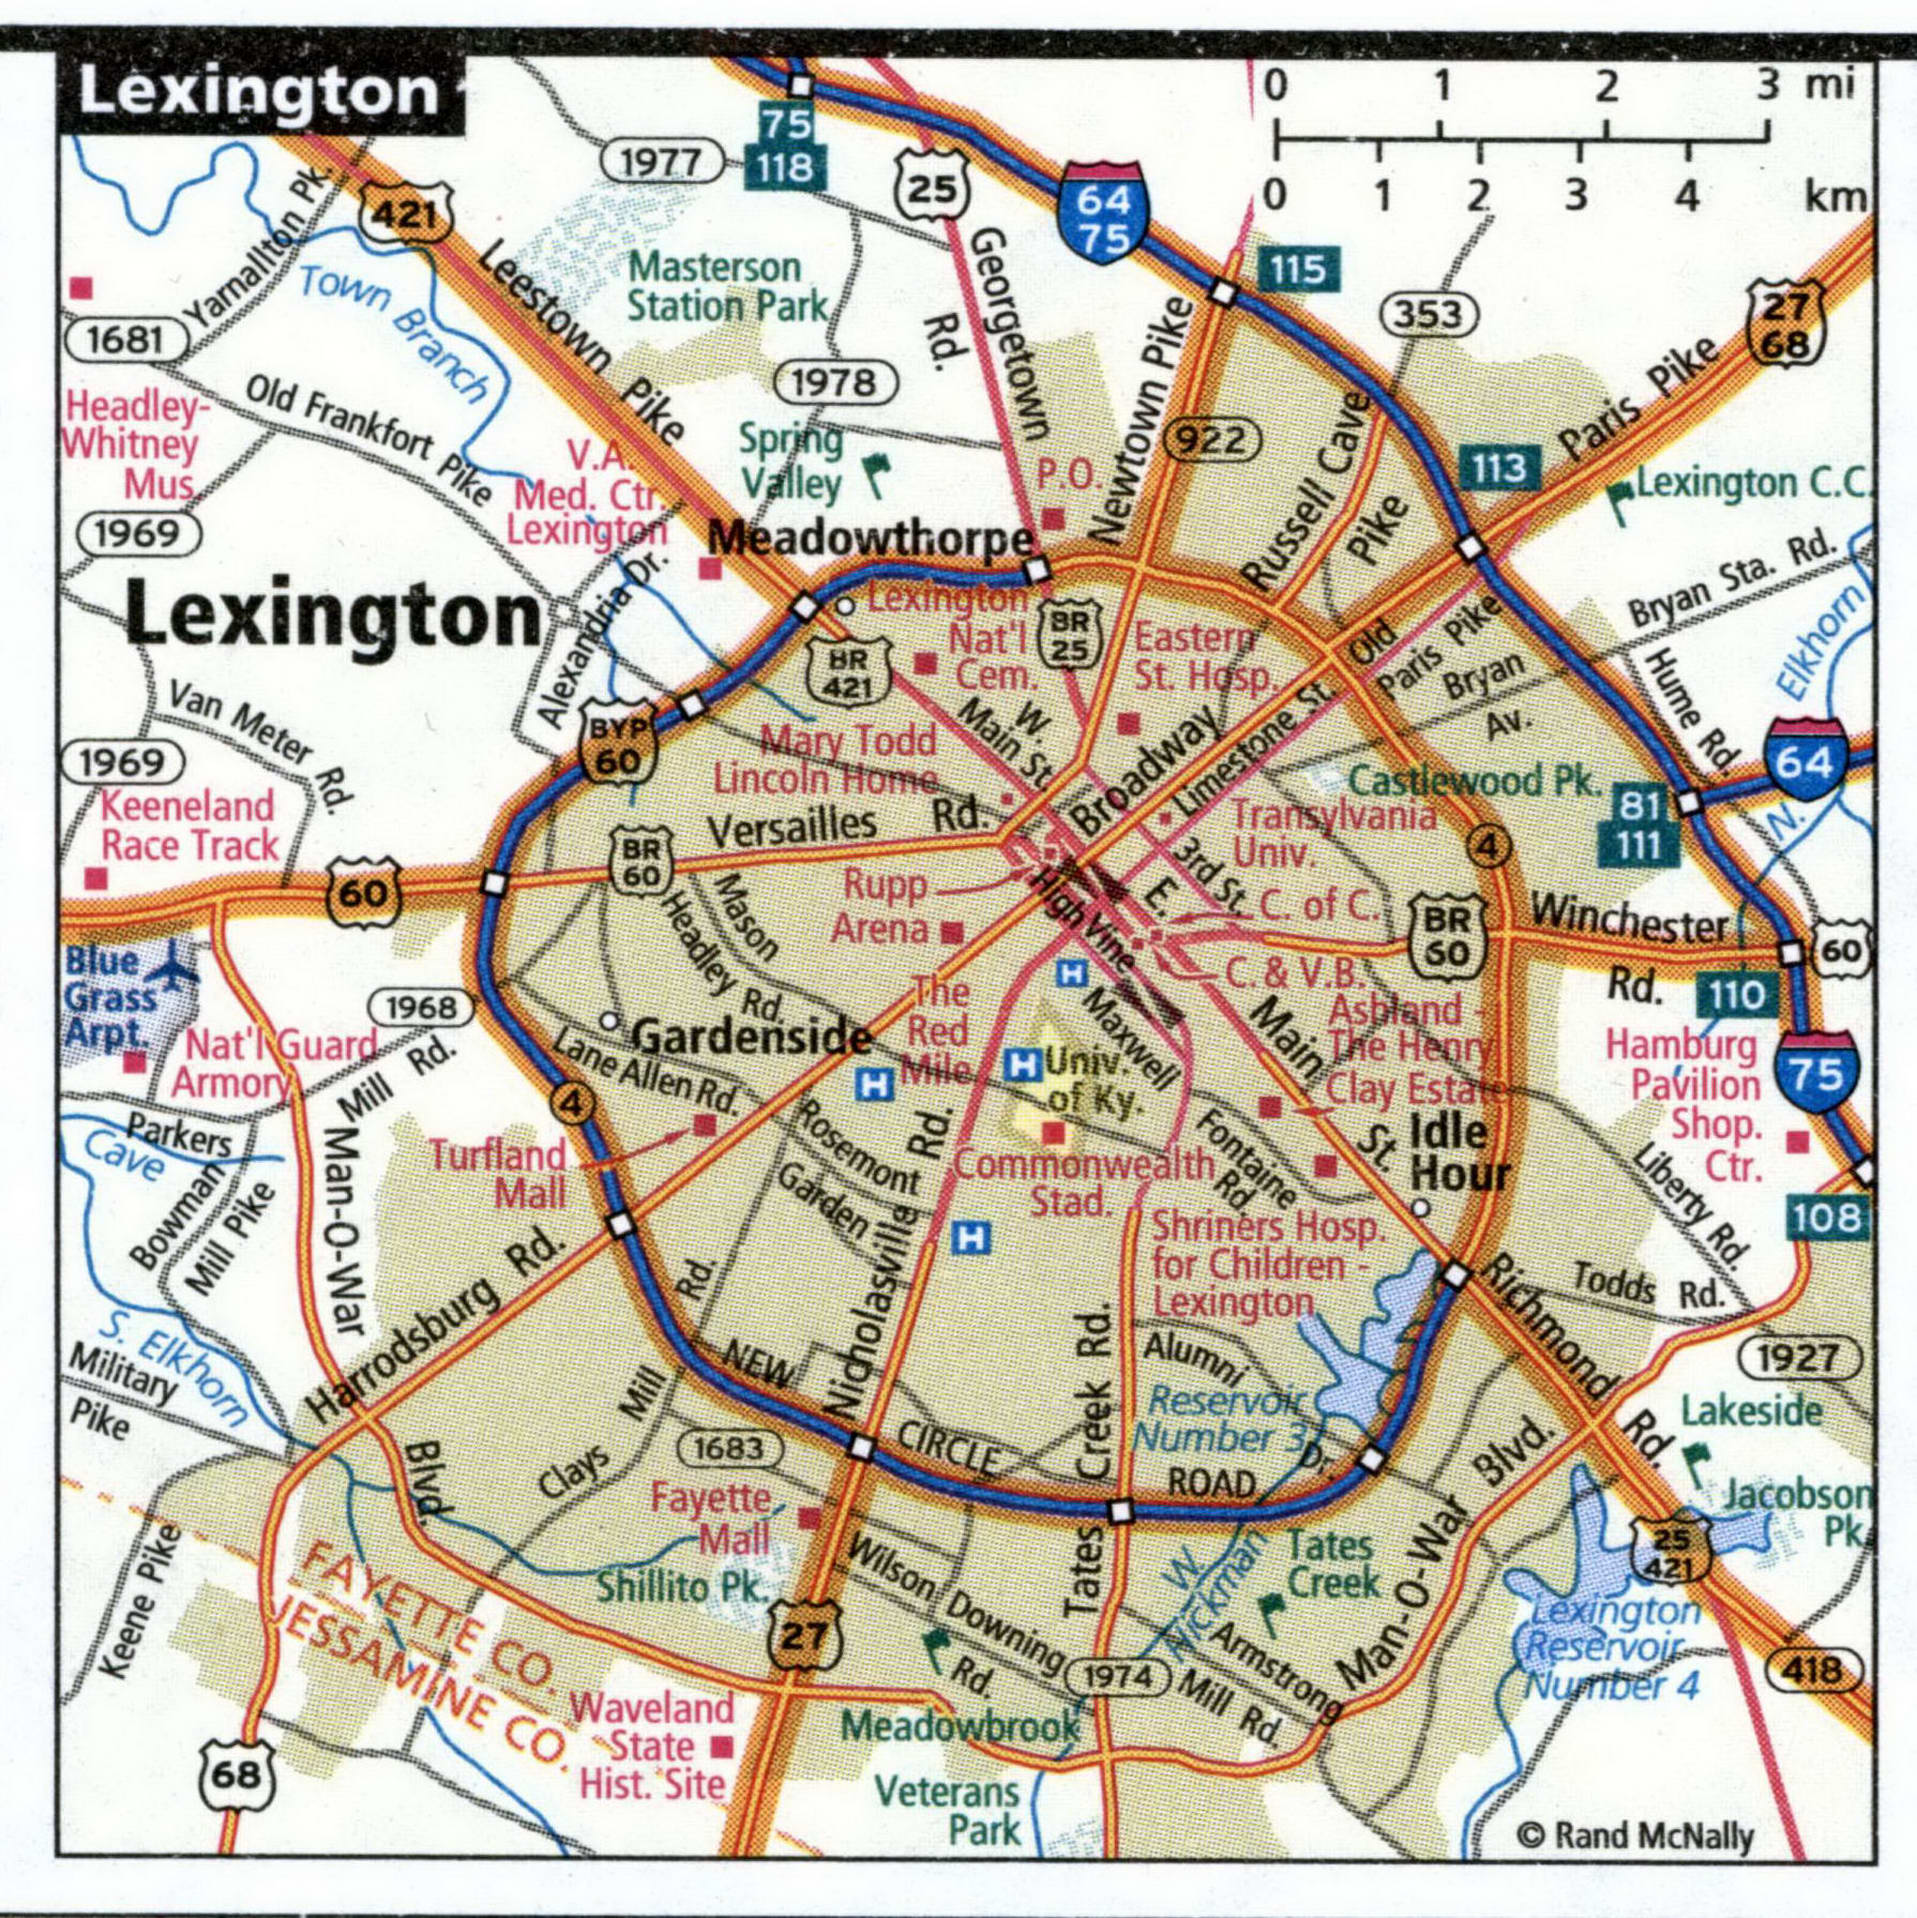 Lexington city road map for truck drivers area town toll free highways ...